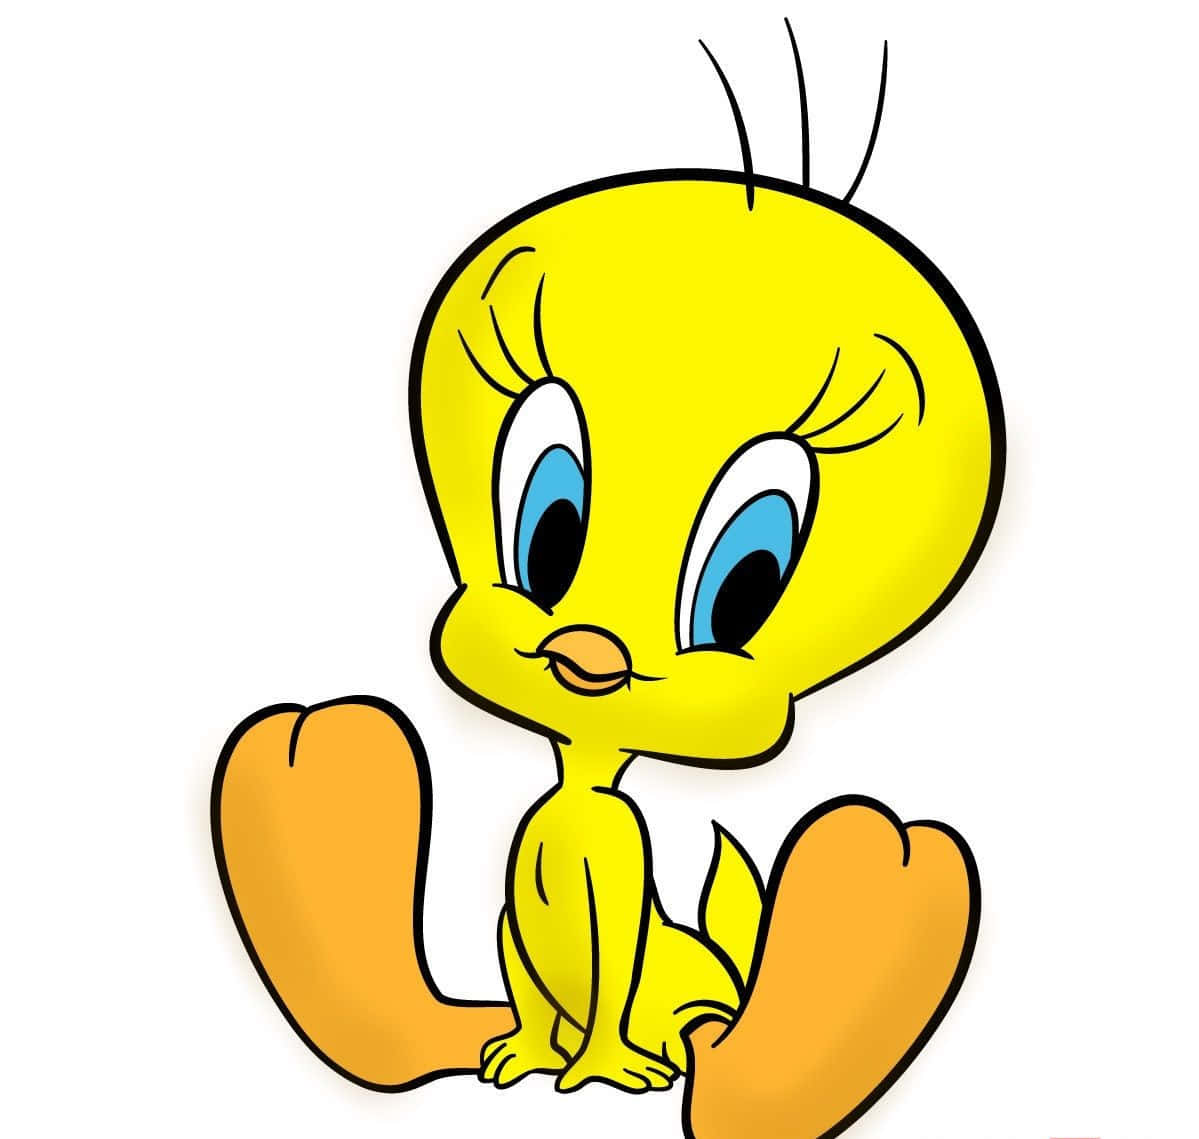 Download The one and only Tweety Bird! | Wallpapers.com